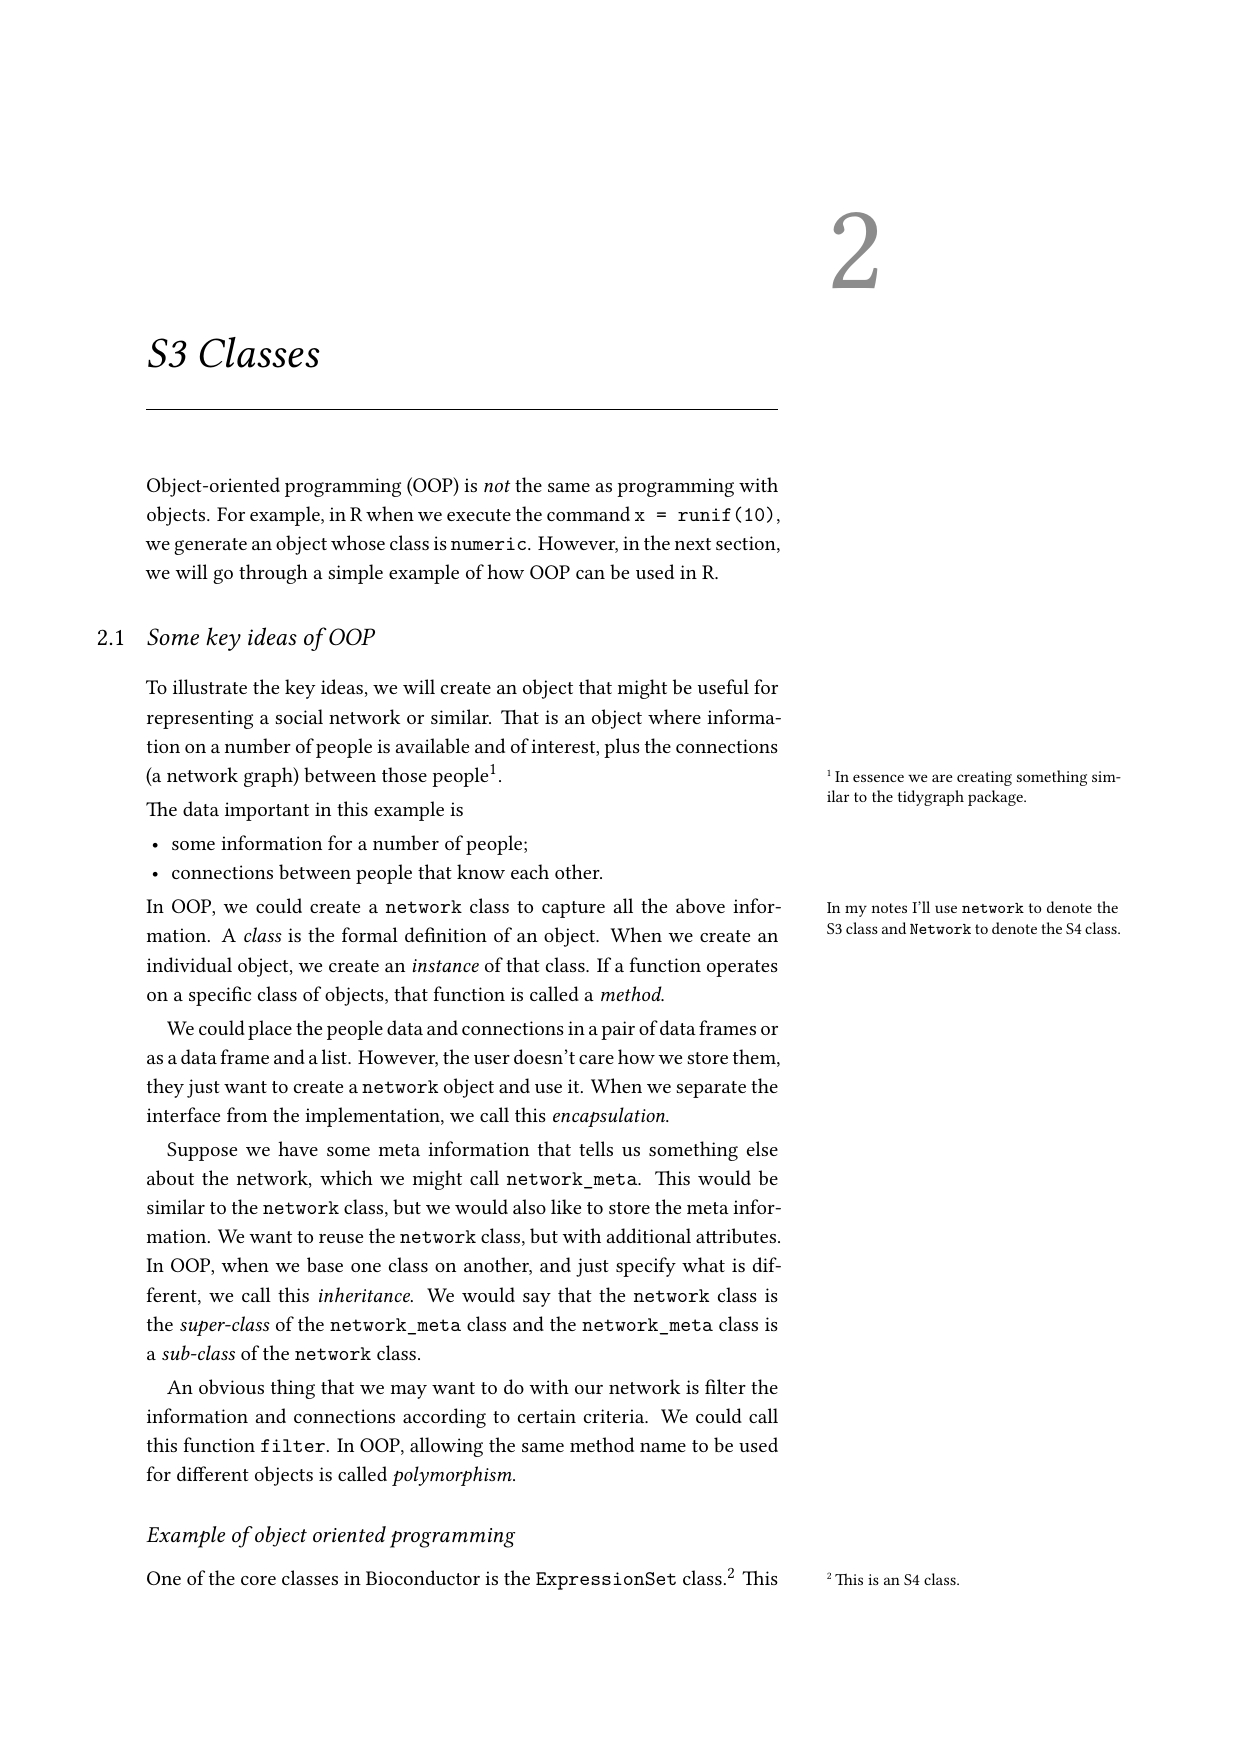 Page 4 of example course material for Object Oriented Programming in R